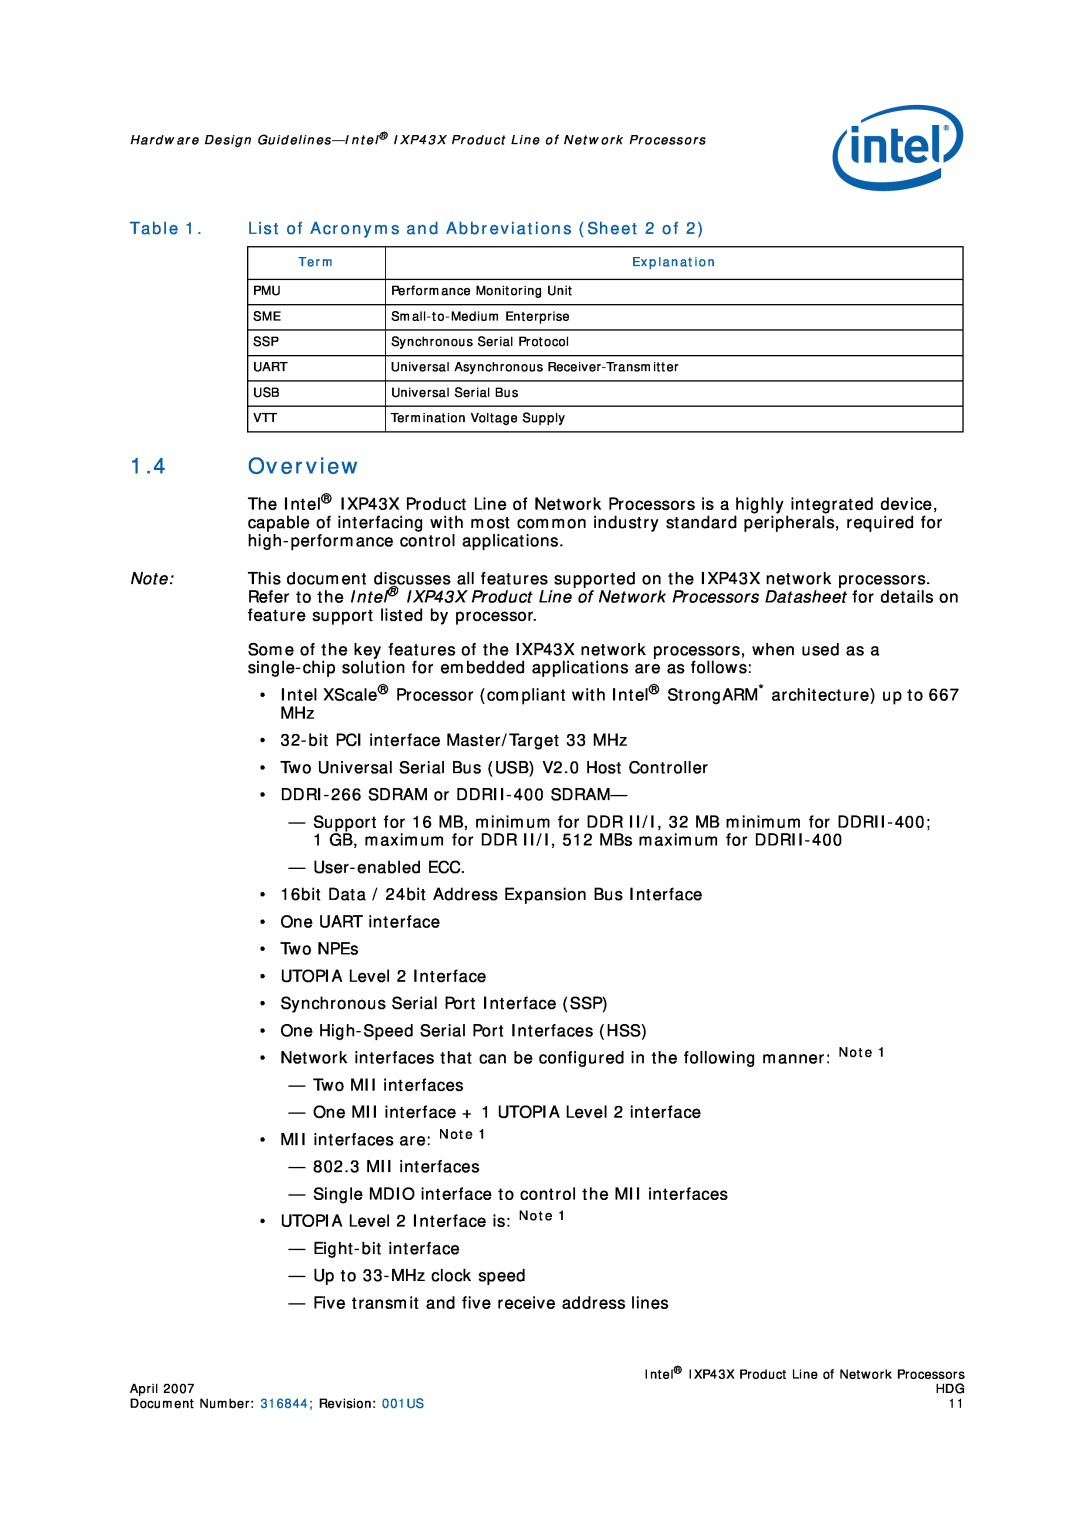 Intel IXP43X manual Overview, List of Acronyms and Abbreviations Sheet 2 of 